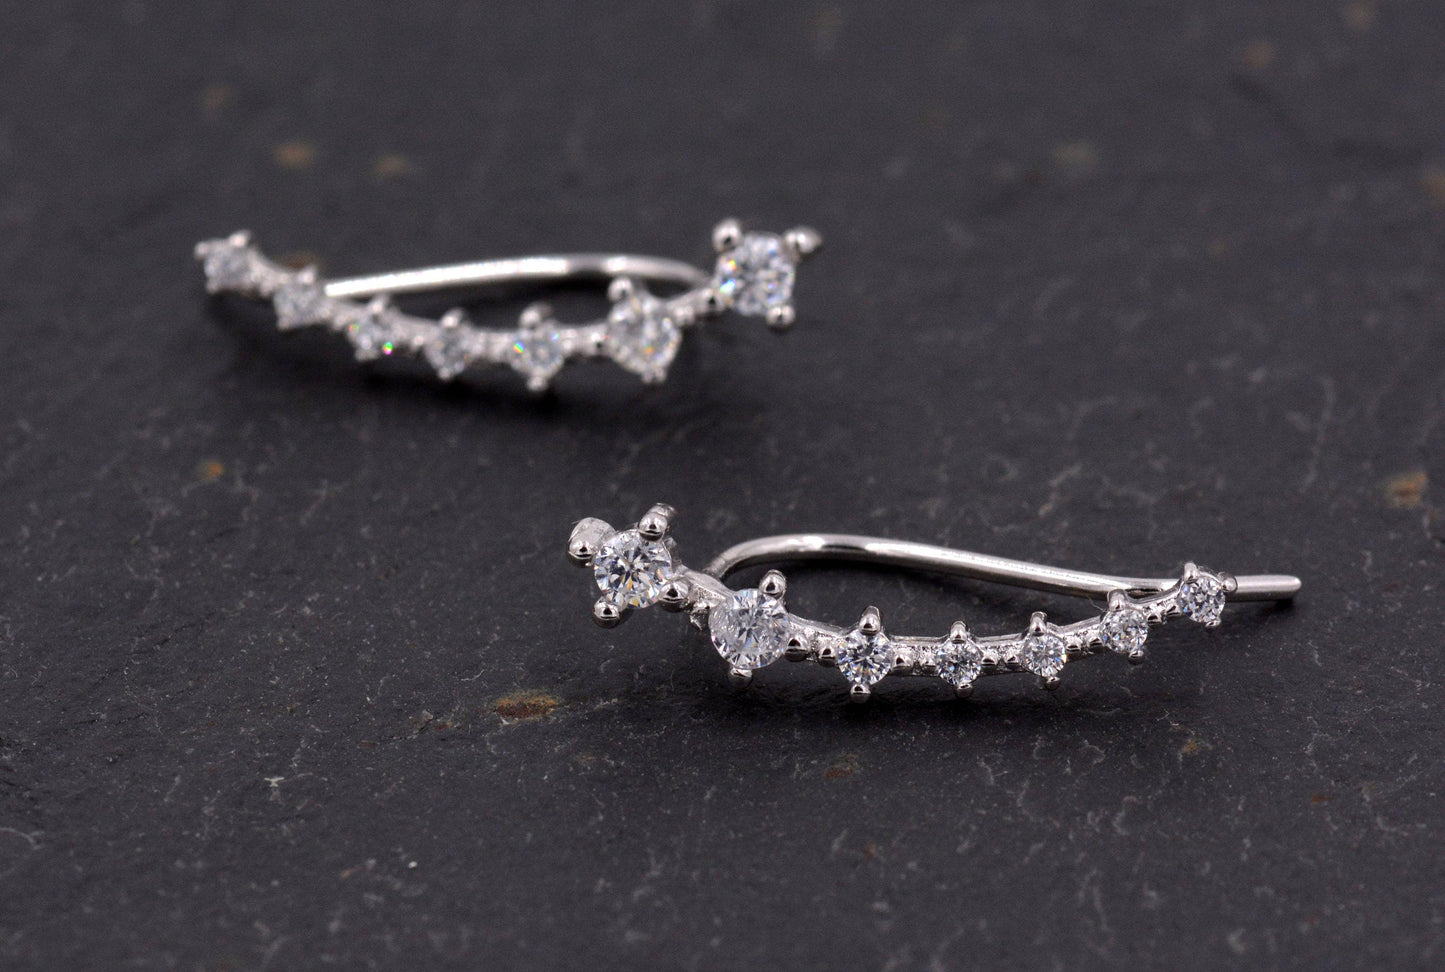 Sterling Silver Ear Crawler Earrings with Sparkly CZ Crystals, Silver, Gold or Rose Gold